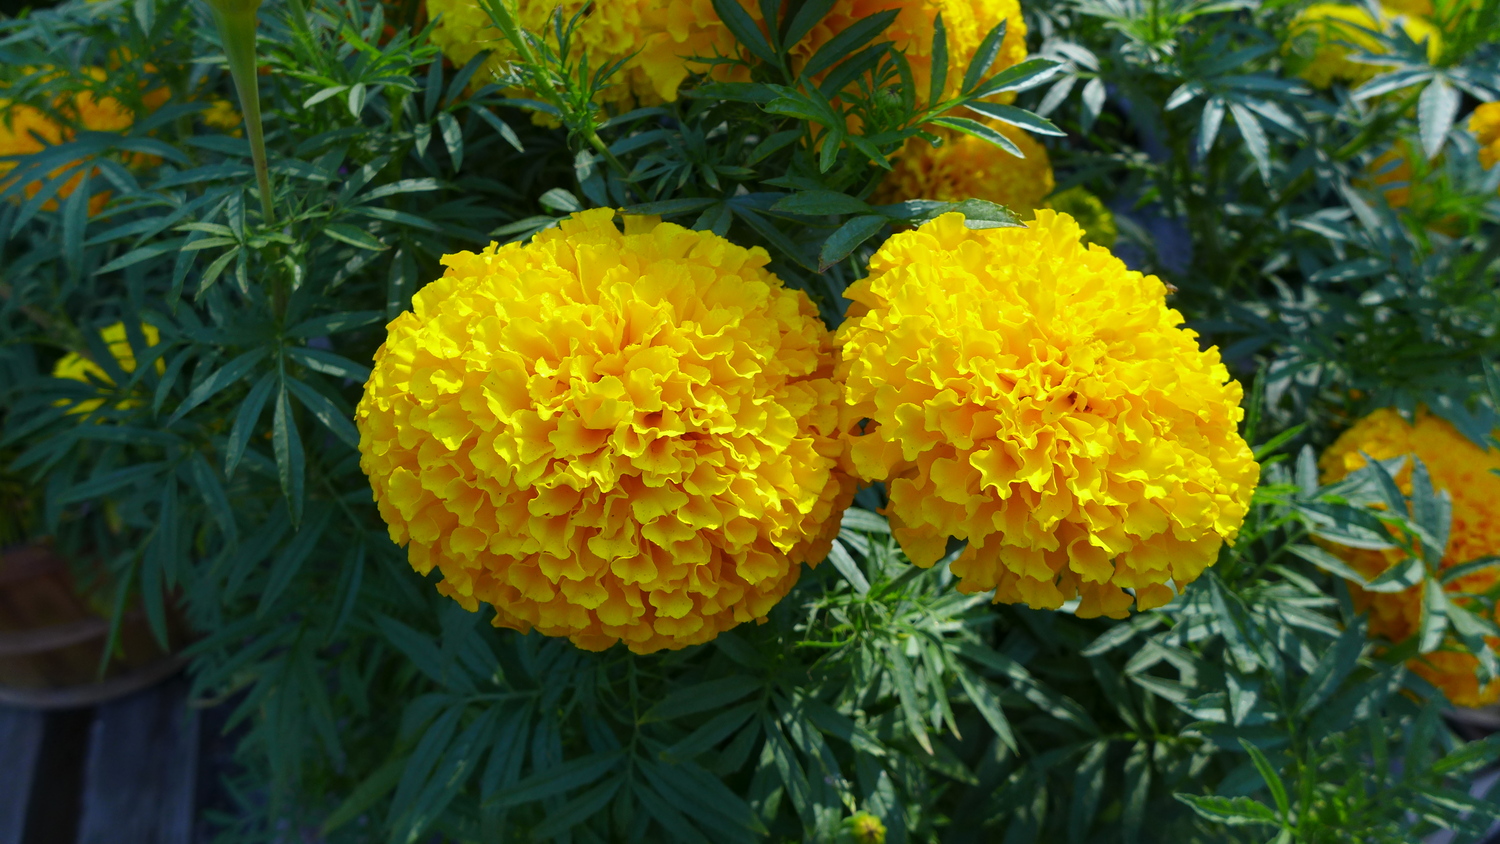 Fully double marigolds like these are available in varieties that grow from eight to over 15 inches tall.  While very versatile, these 